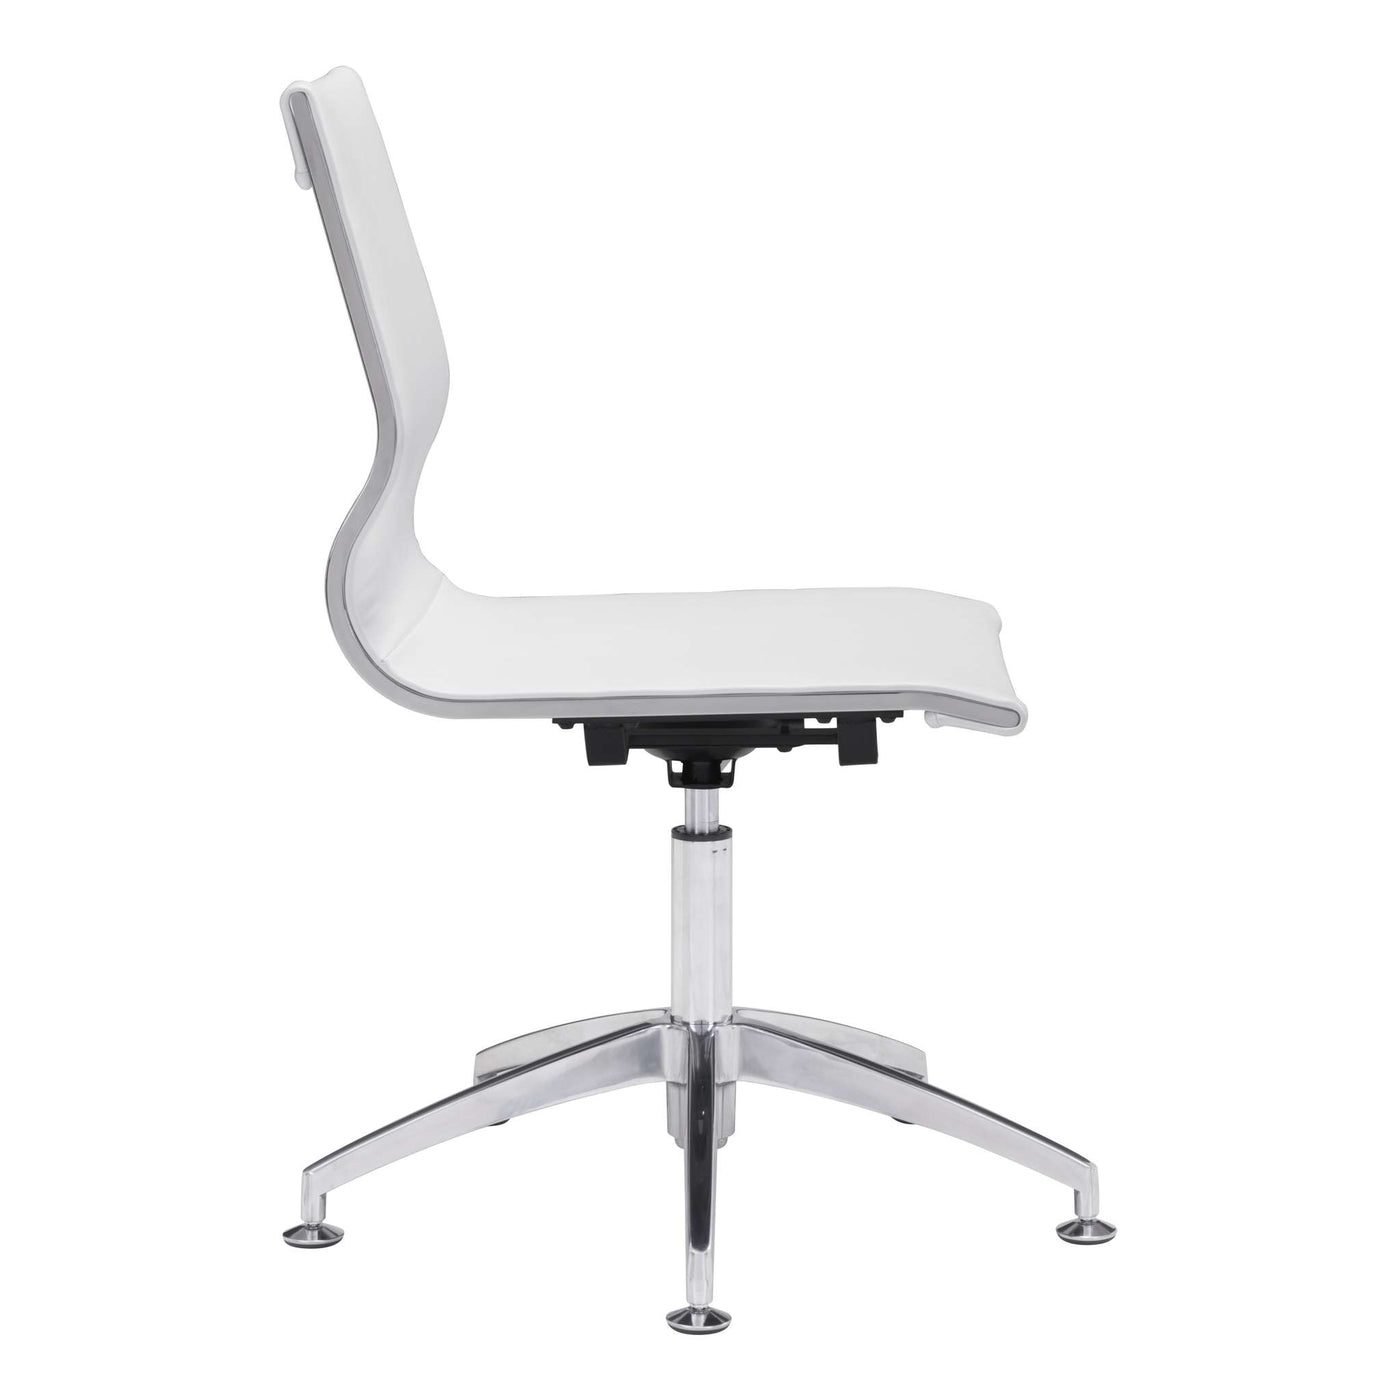 Zuo Mod Glider Conference Chair